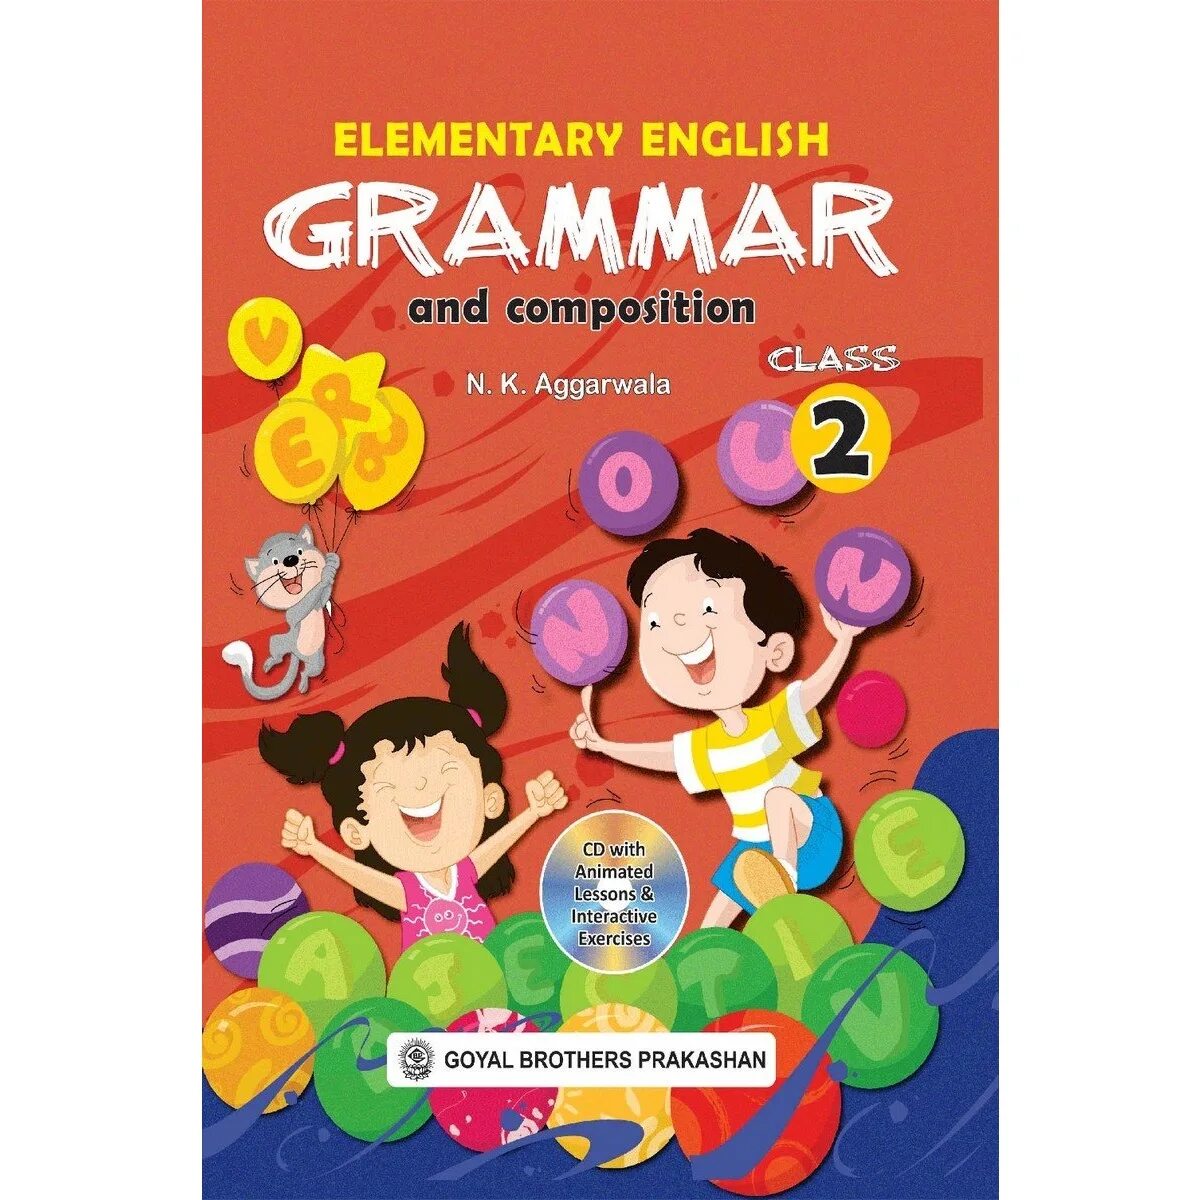 Elementary english video. Elementary English Grammar and Composition. Popular Grammar and Composition. Grammar and Composition 3. Grammar book 2 класс.